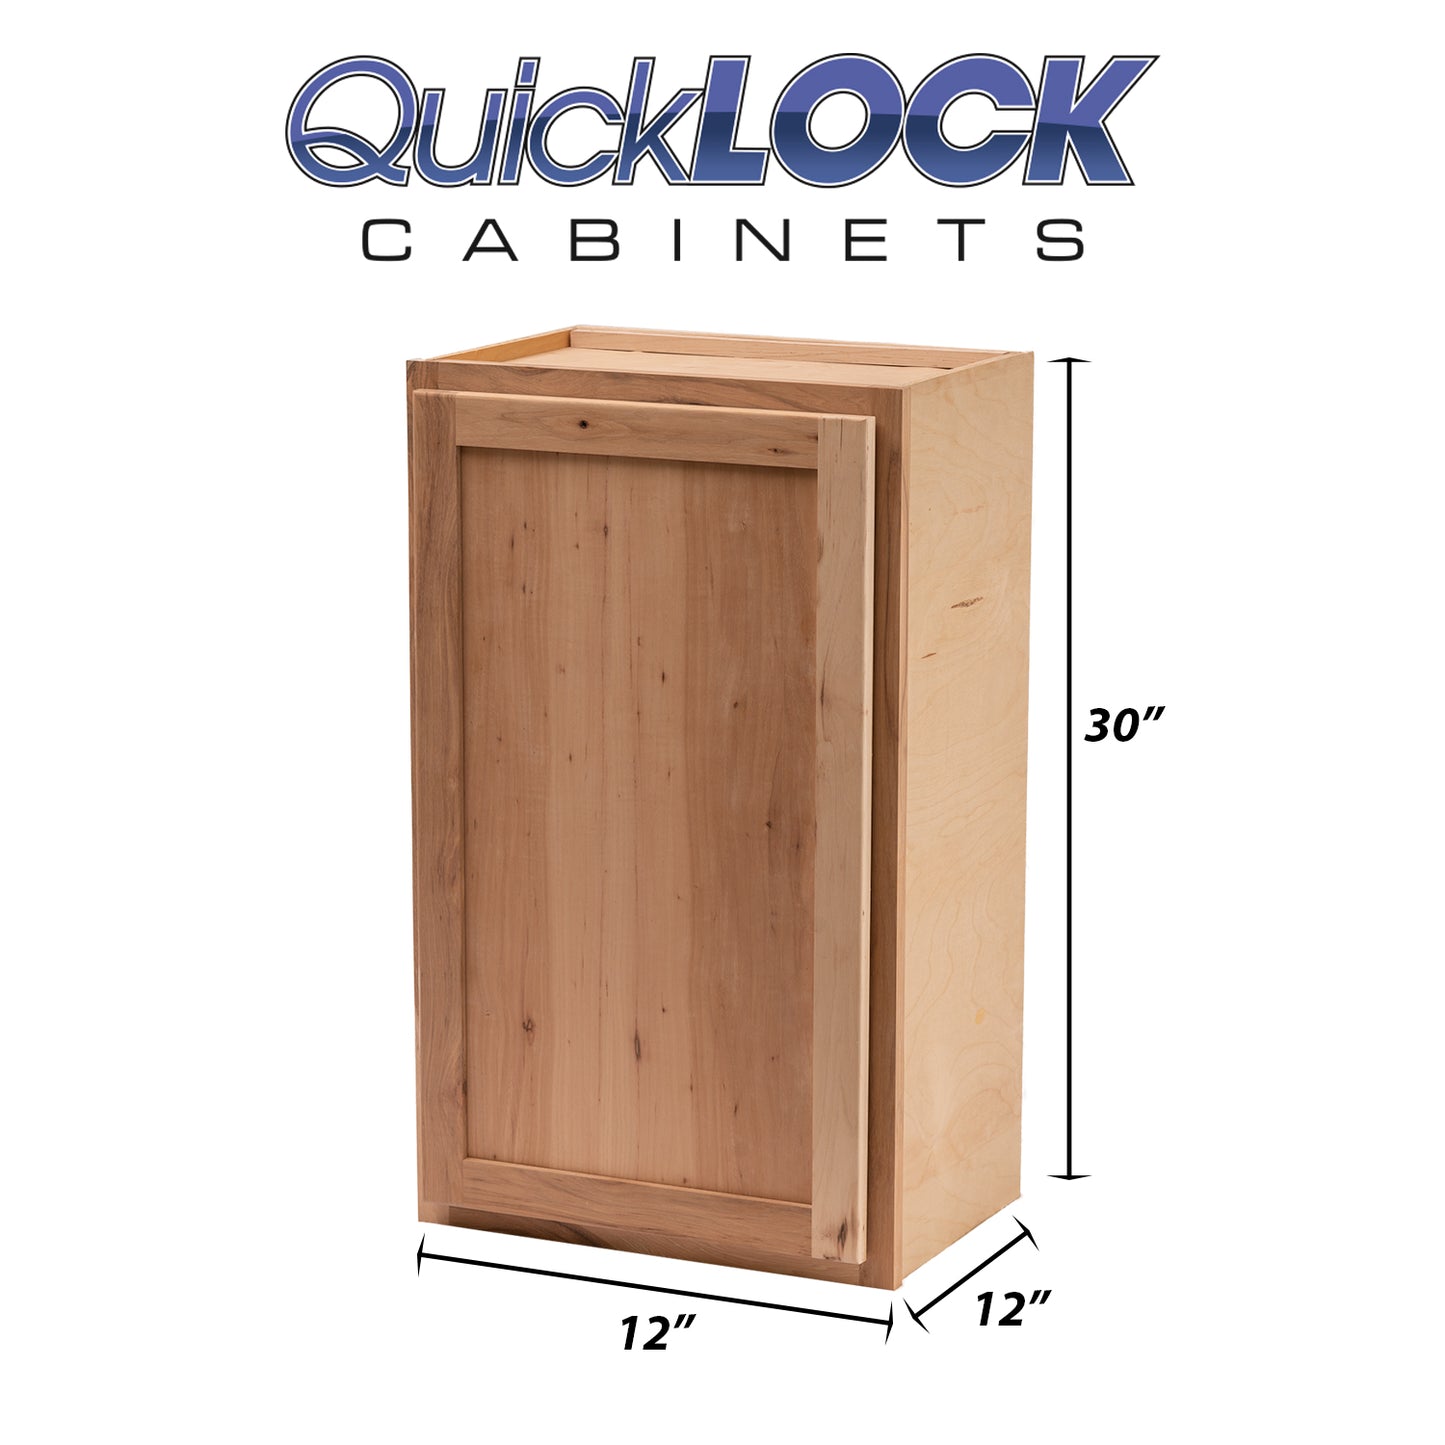 Quicklock RTA - Winding River Collection - Raw Hickory 12"Wx30"Hx12"D Wall Cabinet